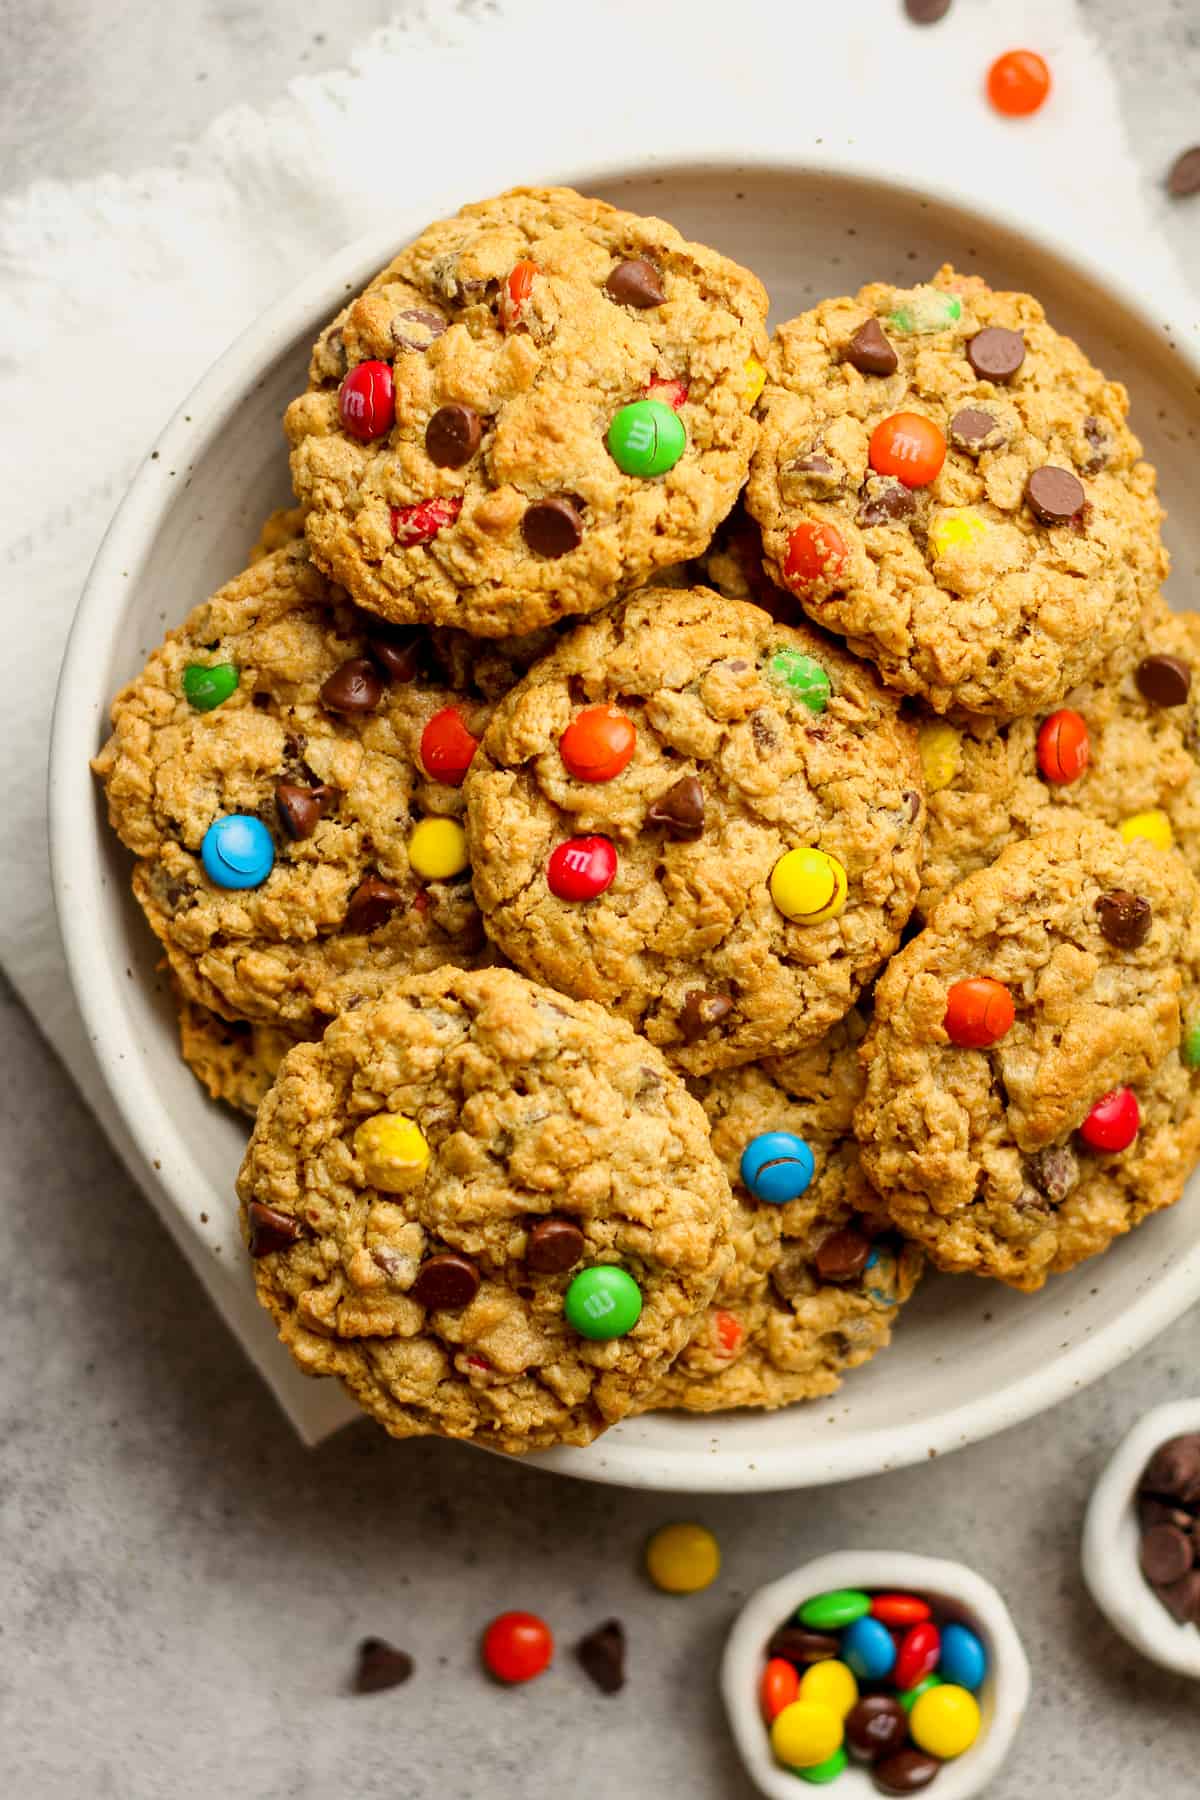 A bowl of monster cookies with m&ms and chocolate chips.